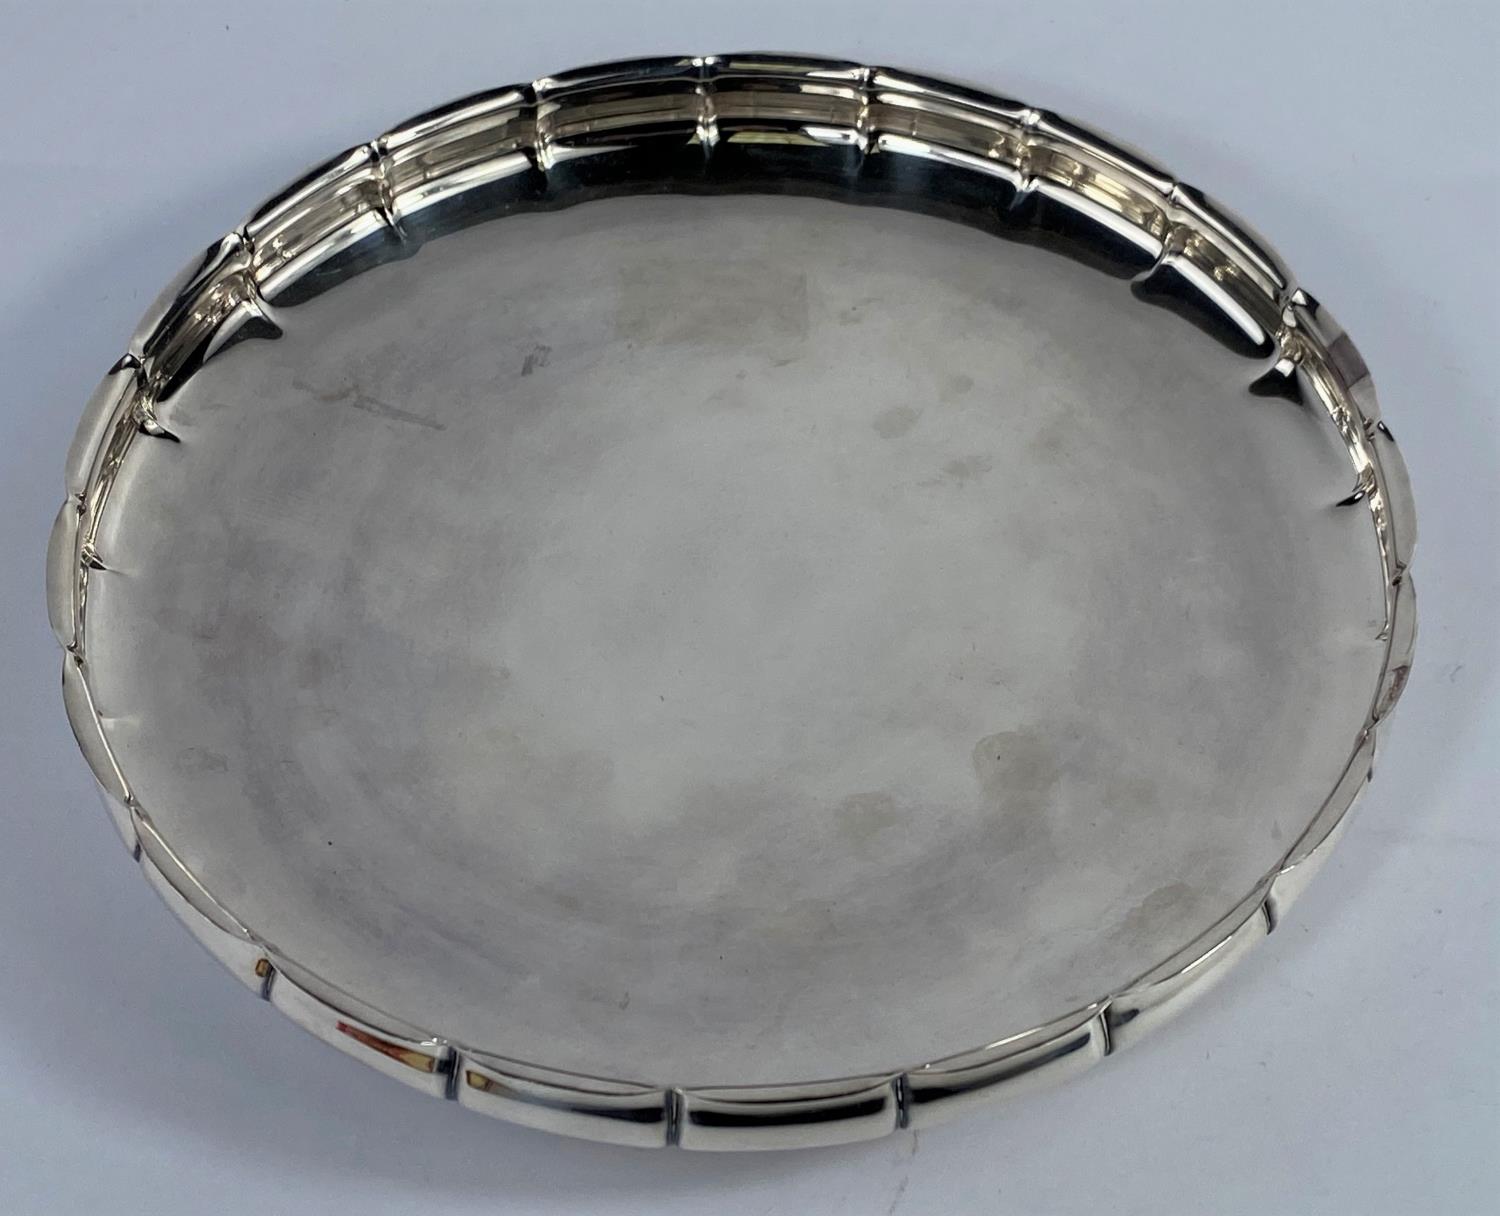 A David anderson silver shallow dish with pie crust edge and 3 feet, marked D A S830 to the base, - Image 2 of 3